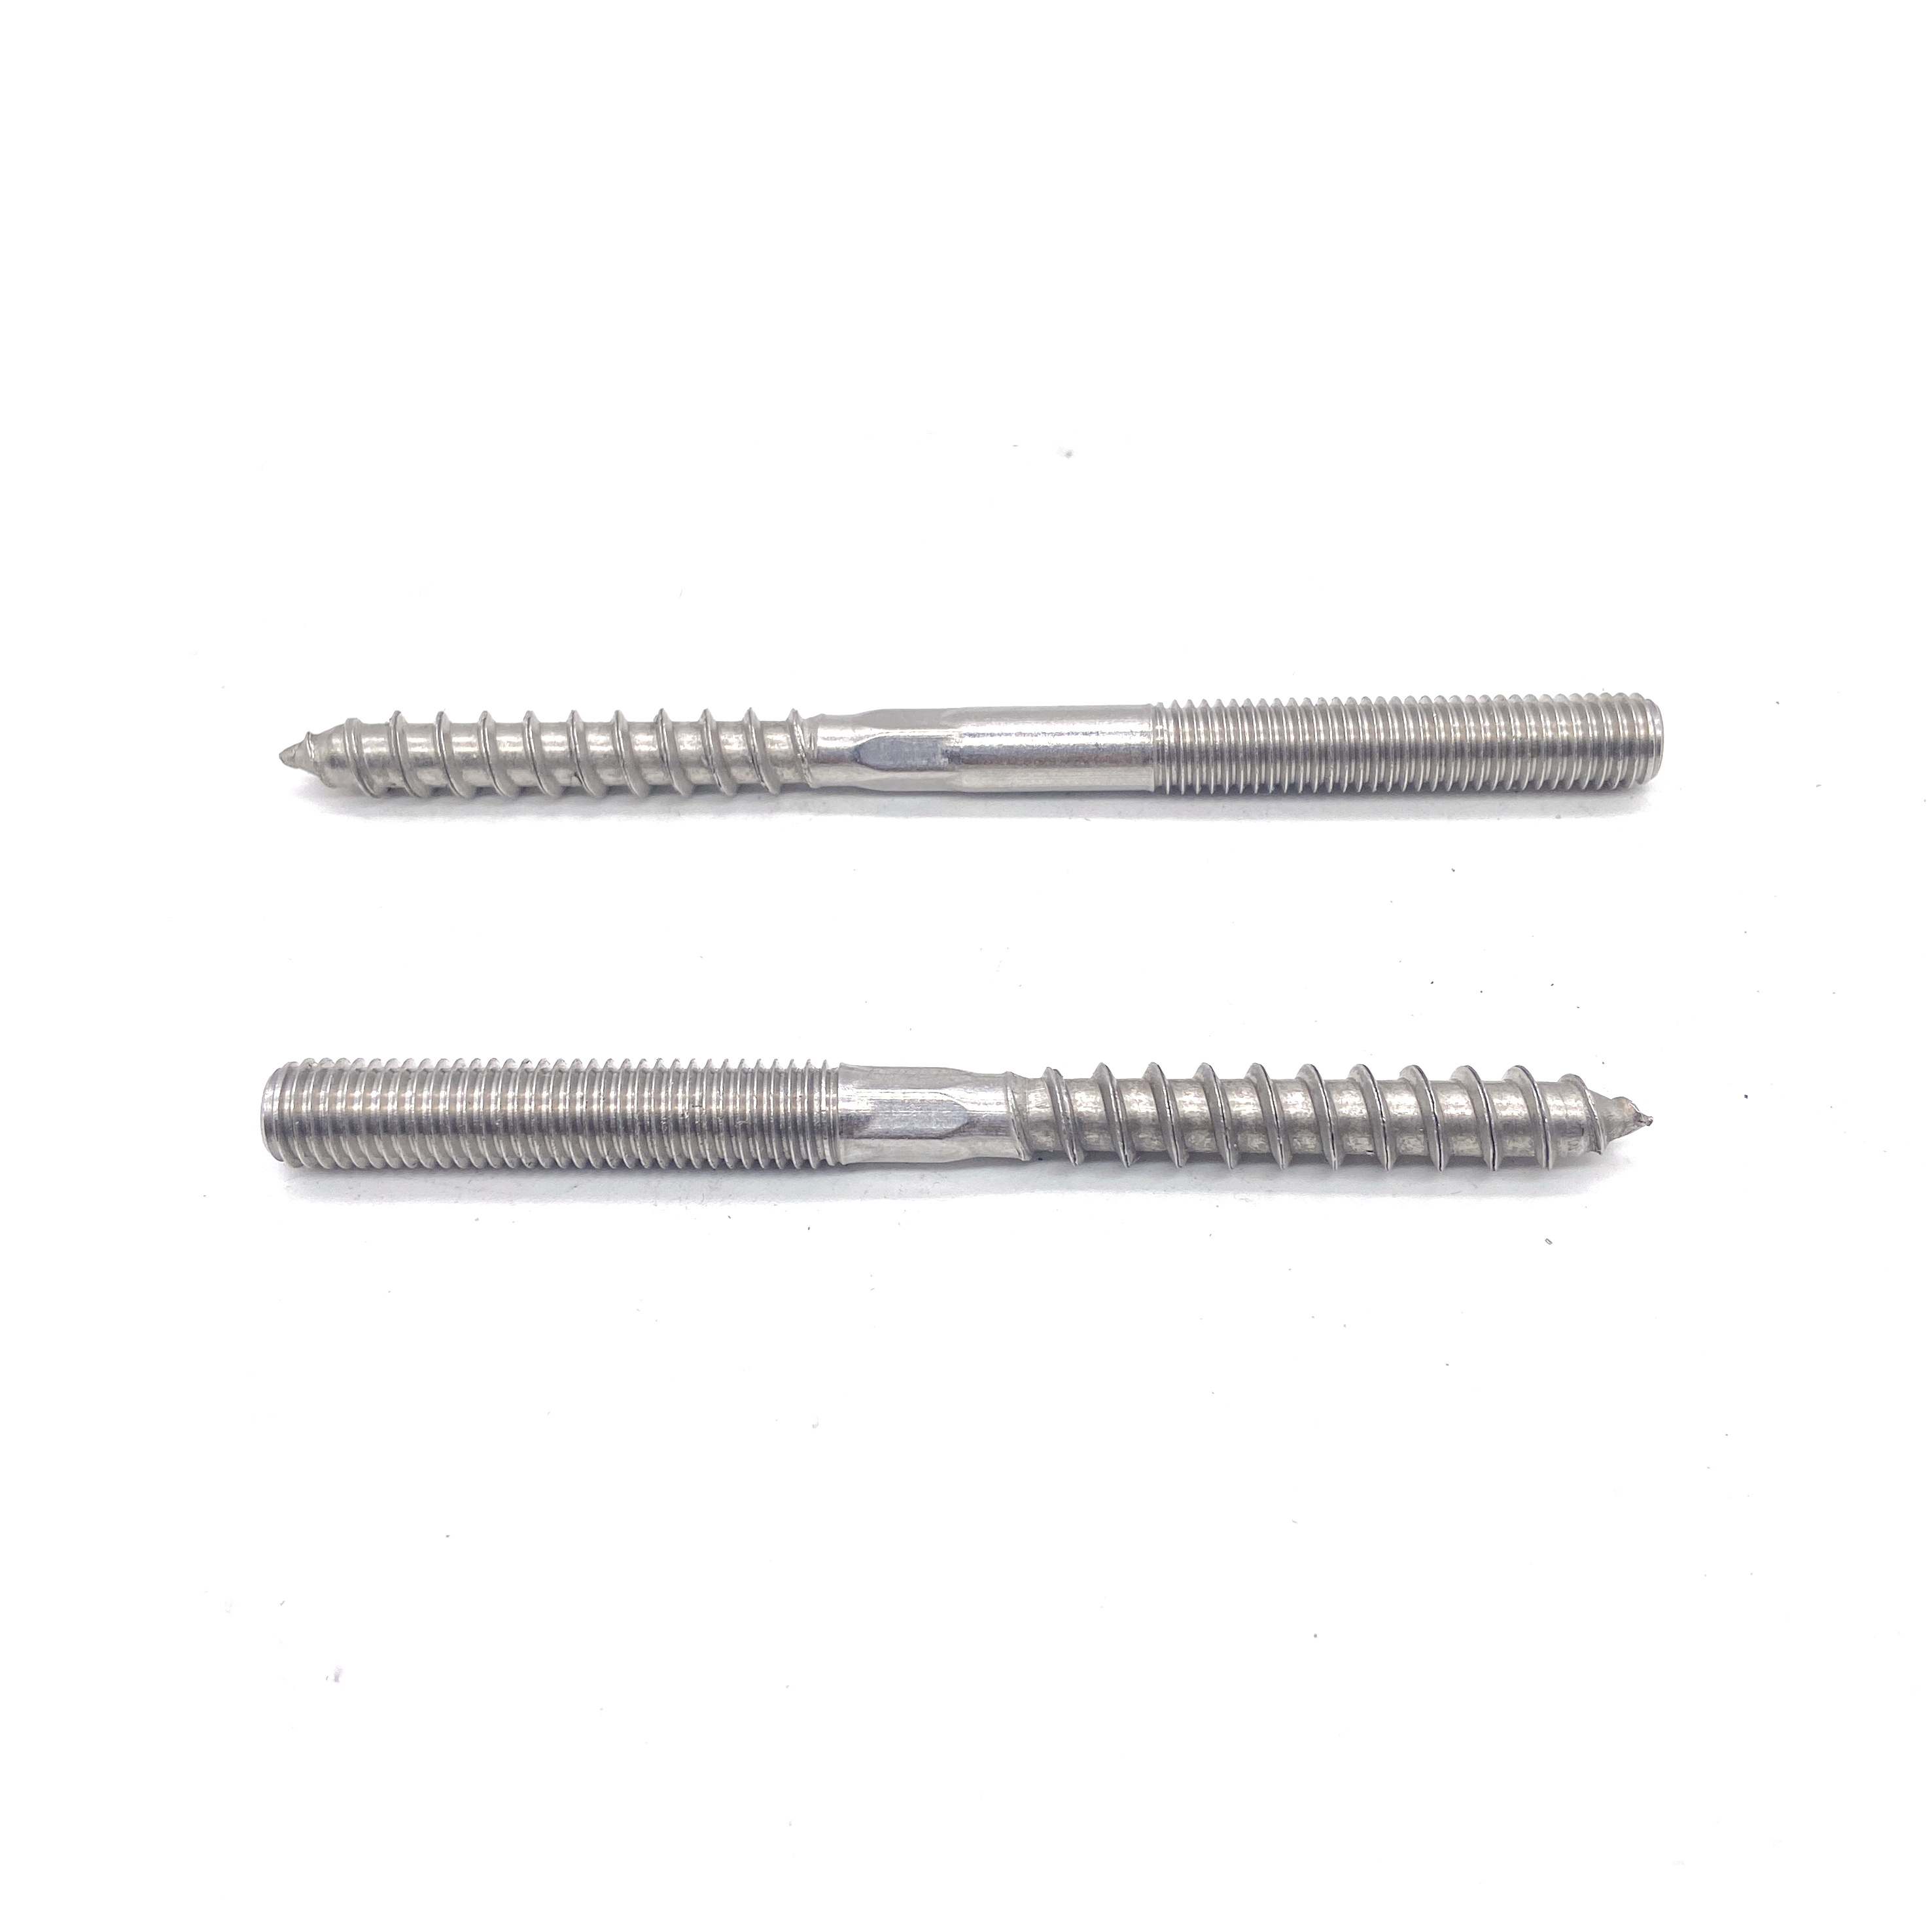 Stainless Steel Customized Double Thread Hanger Bolt Threaded Studs Wood Screw